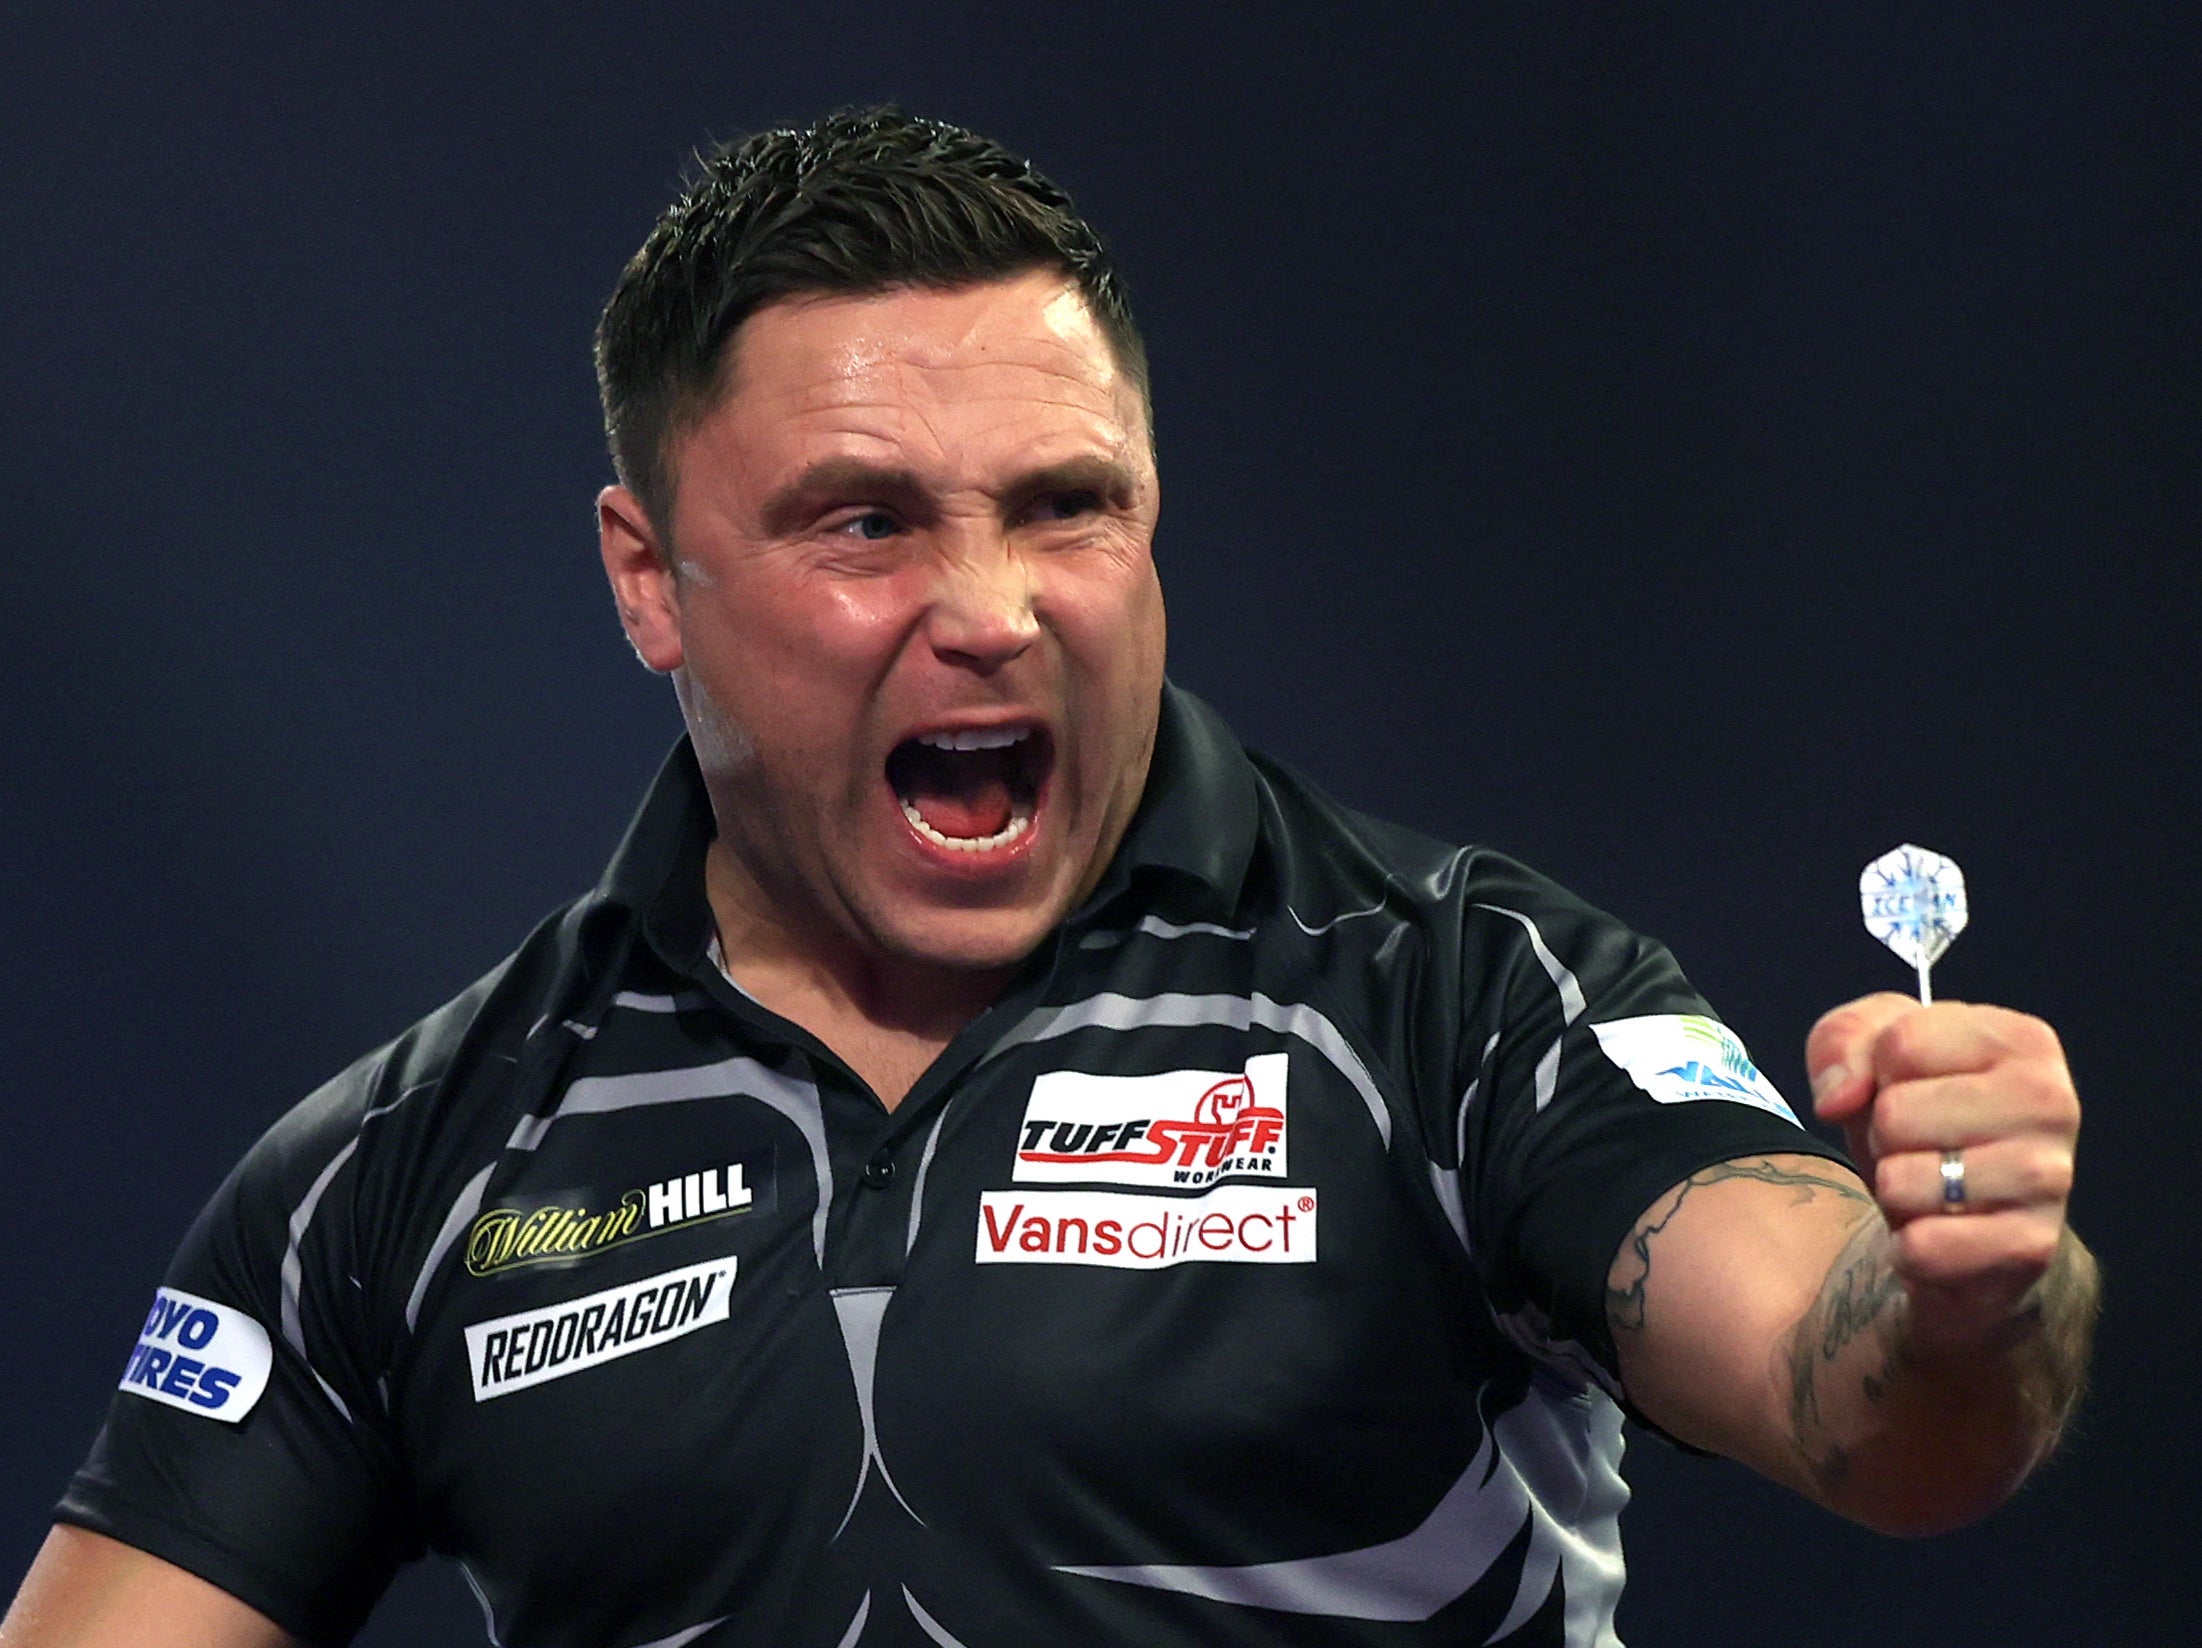 Former rugby professional and new darts world No. 1 Gerwyn Price